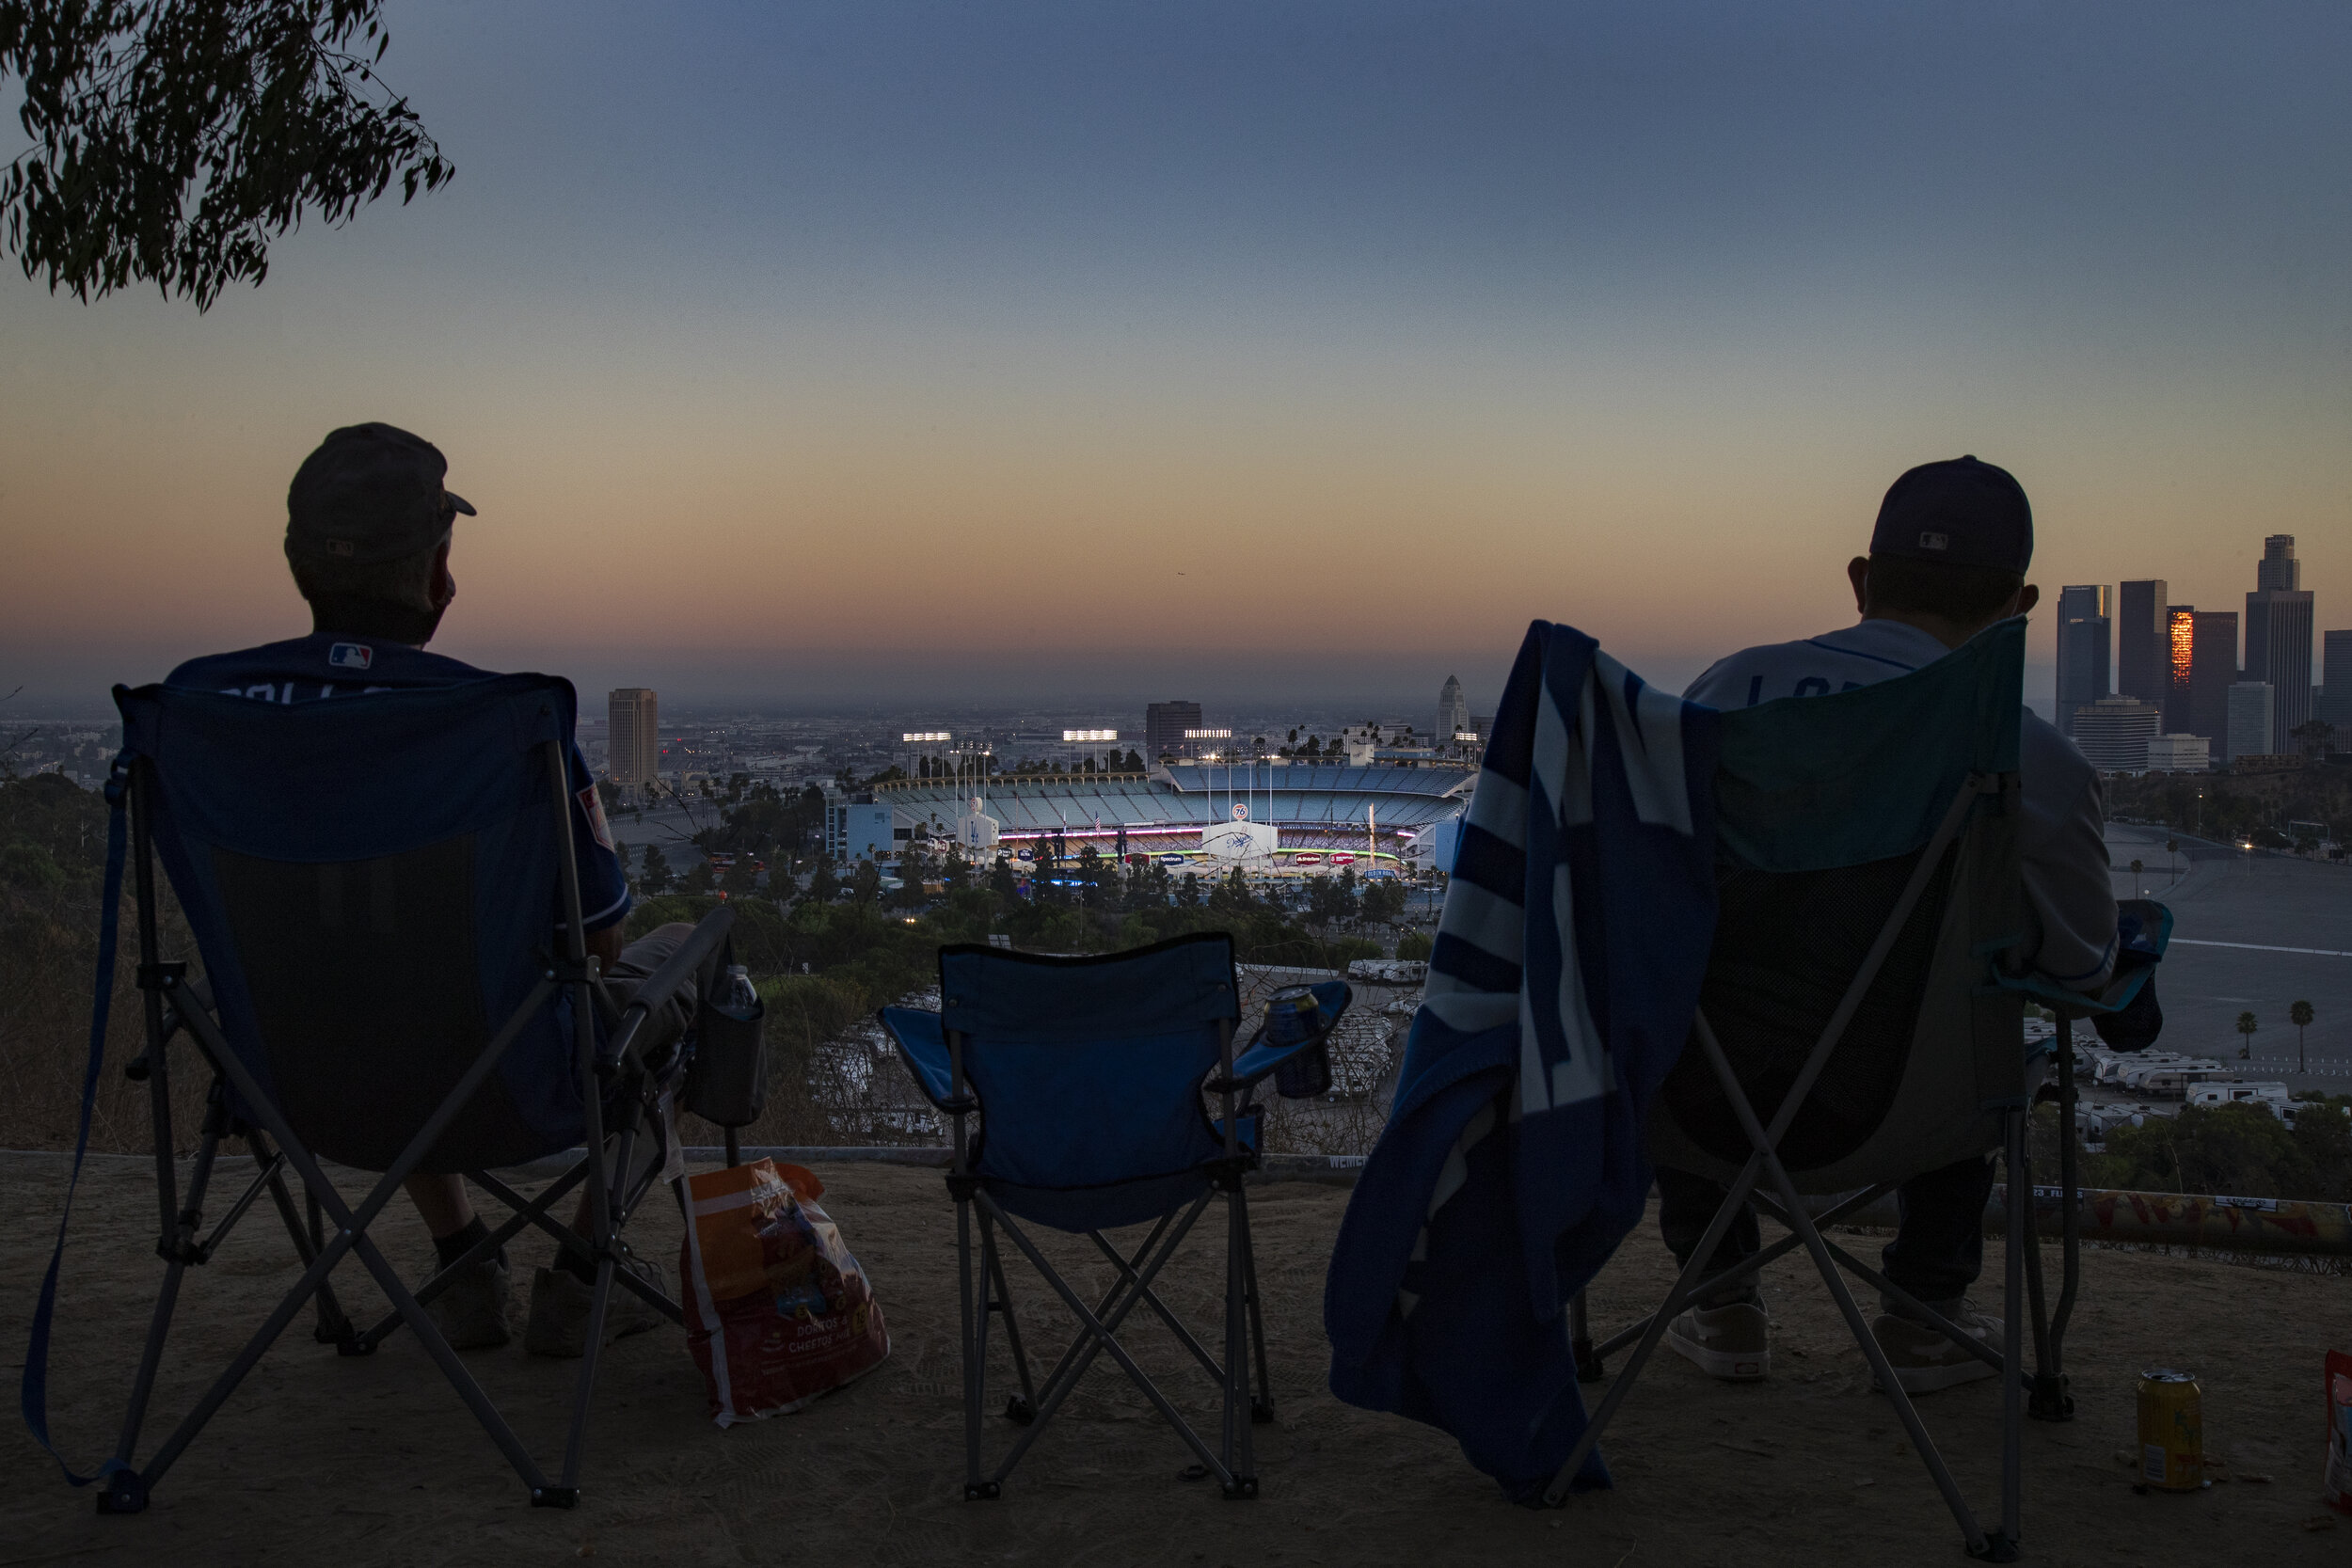  LOS ANGELES, CA - AUGUST 8, 2020: Season ticket holder Keith Hupp, left, and David Lopez, right, watch the Dodgers play the San Francisco Giants from a far overlook spot because of the coronavirus pandemic in Elysian Park on August 8, 2020 in Los An